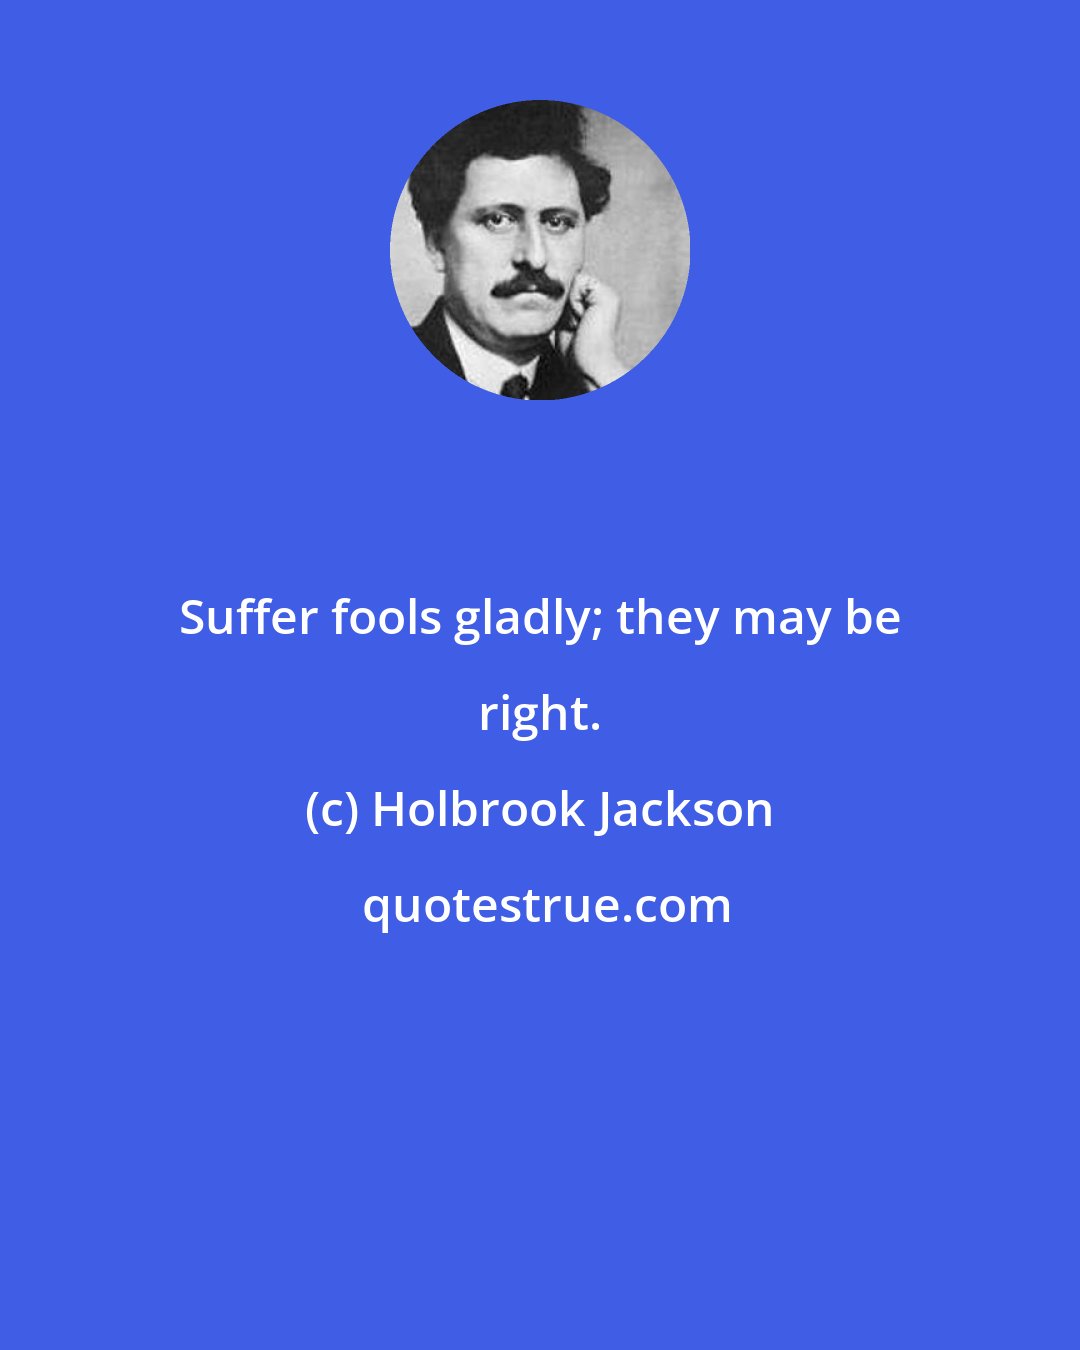 Holbrook Jackson: Suffer fools gladly; they may be right.